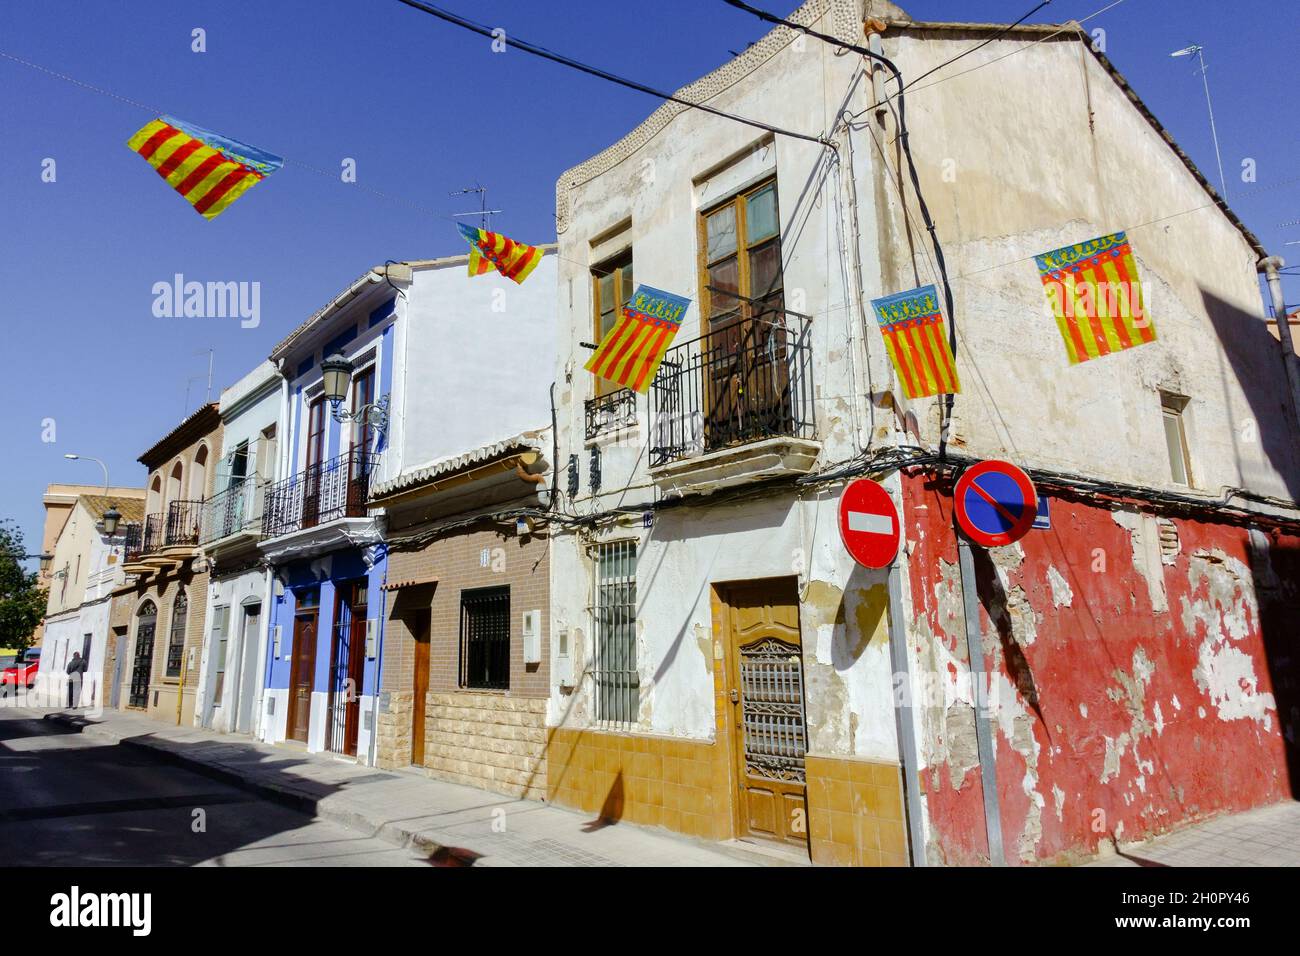 Spain Valencia El Cabanyal district old houses Stock Photo